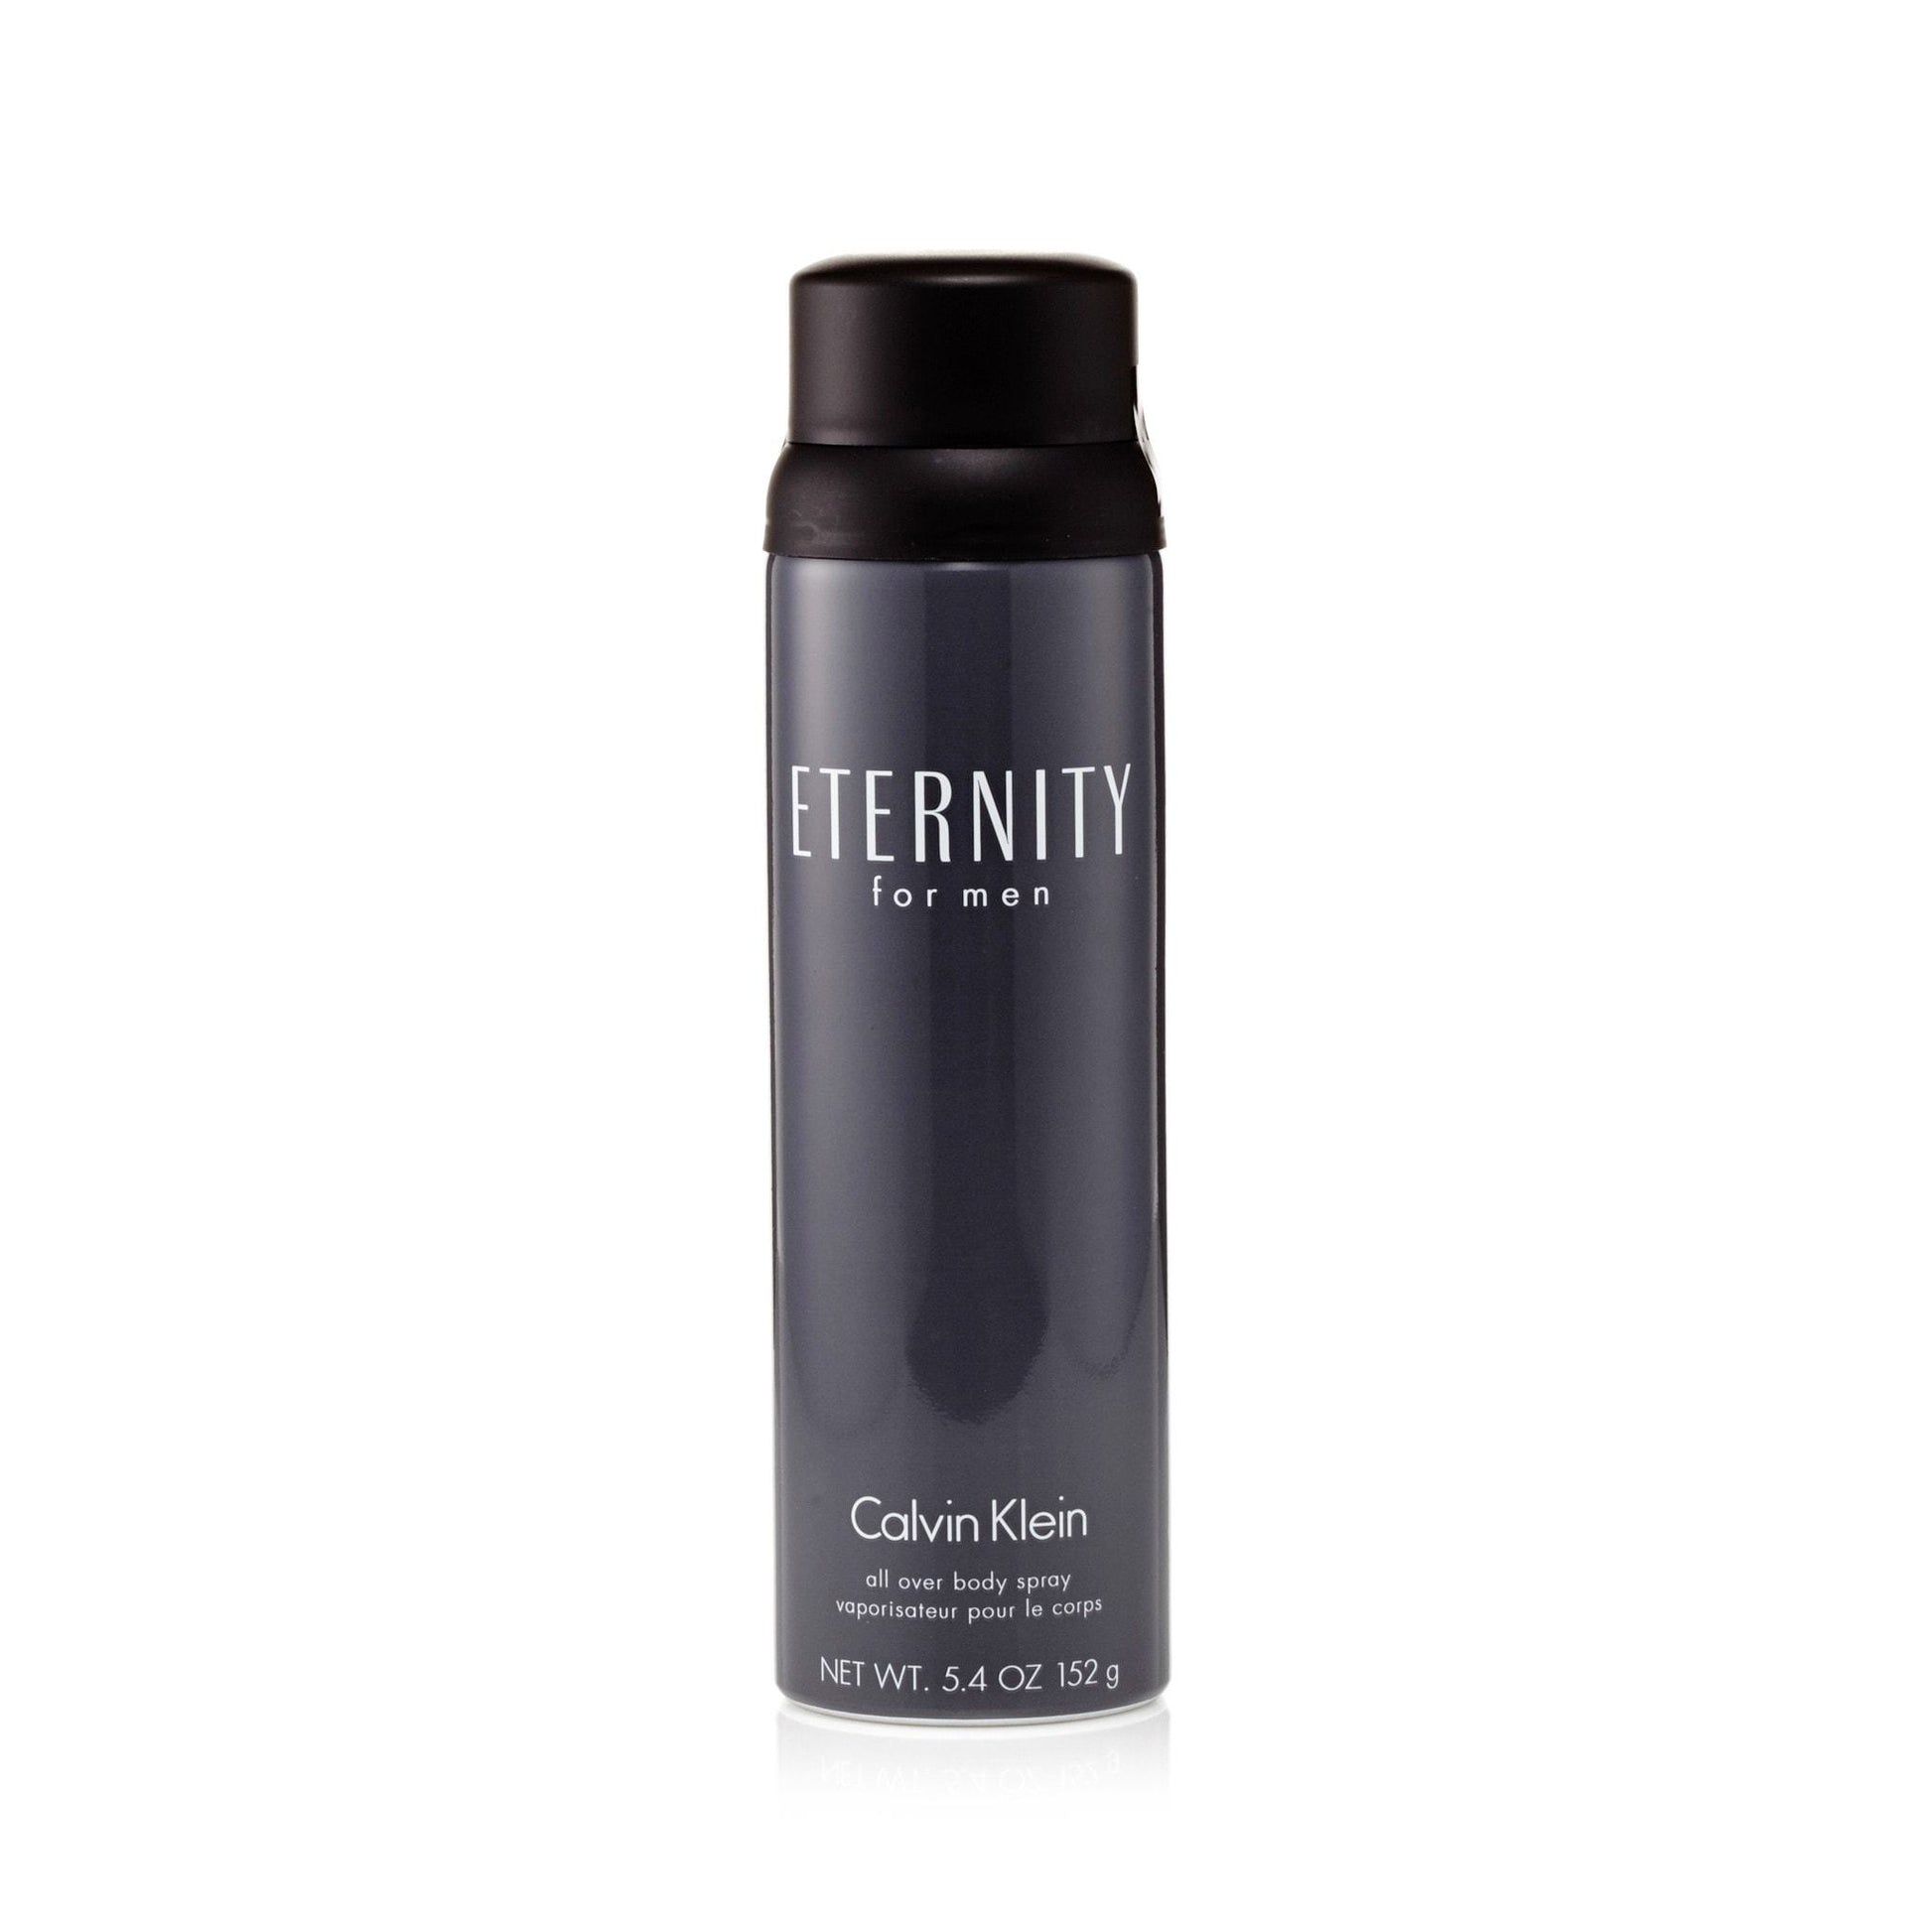 CK Eternity Body Spray for Men by Calvin Klein, Product image 1